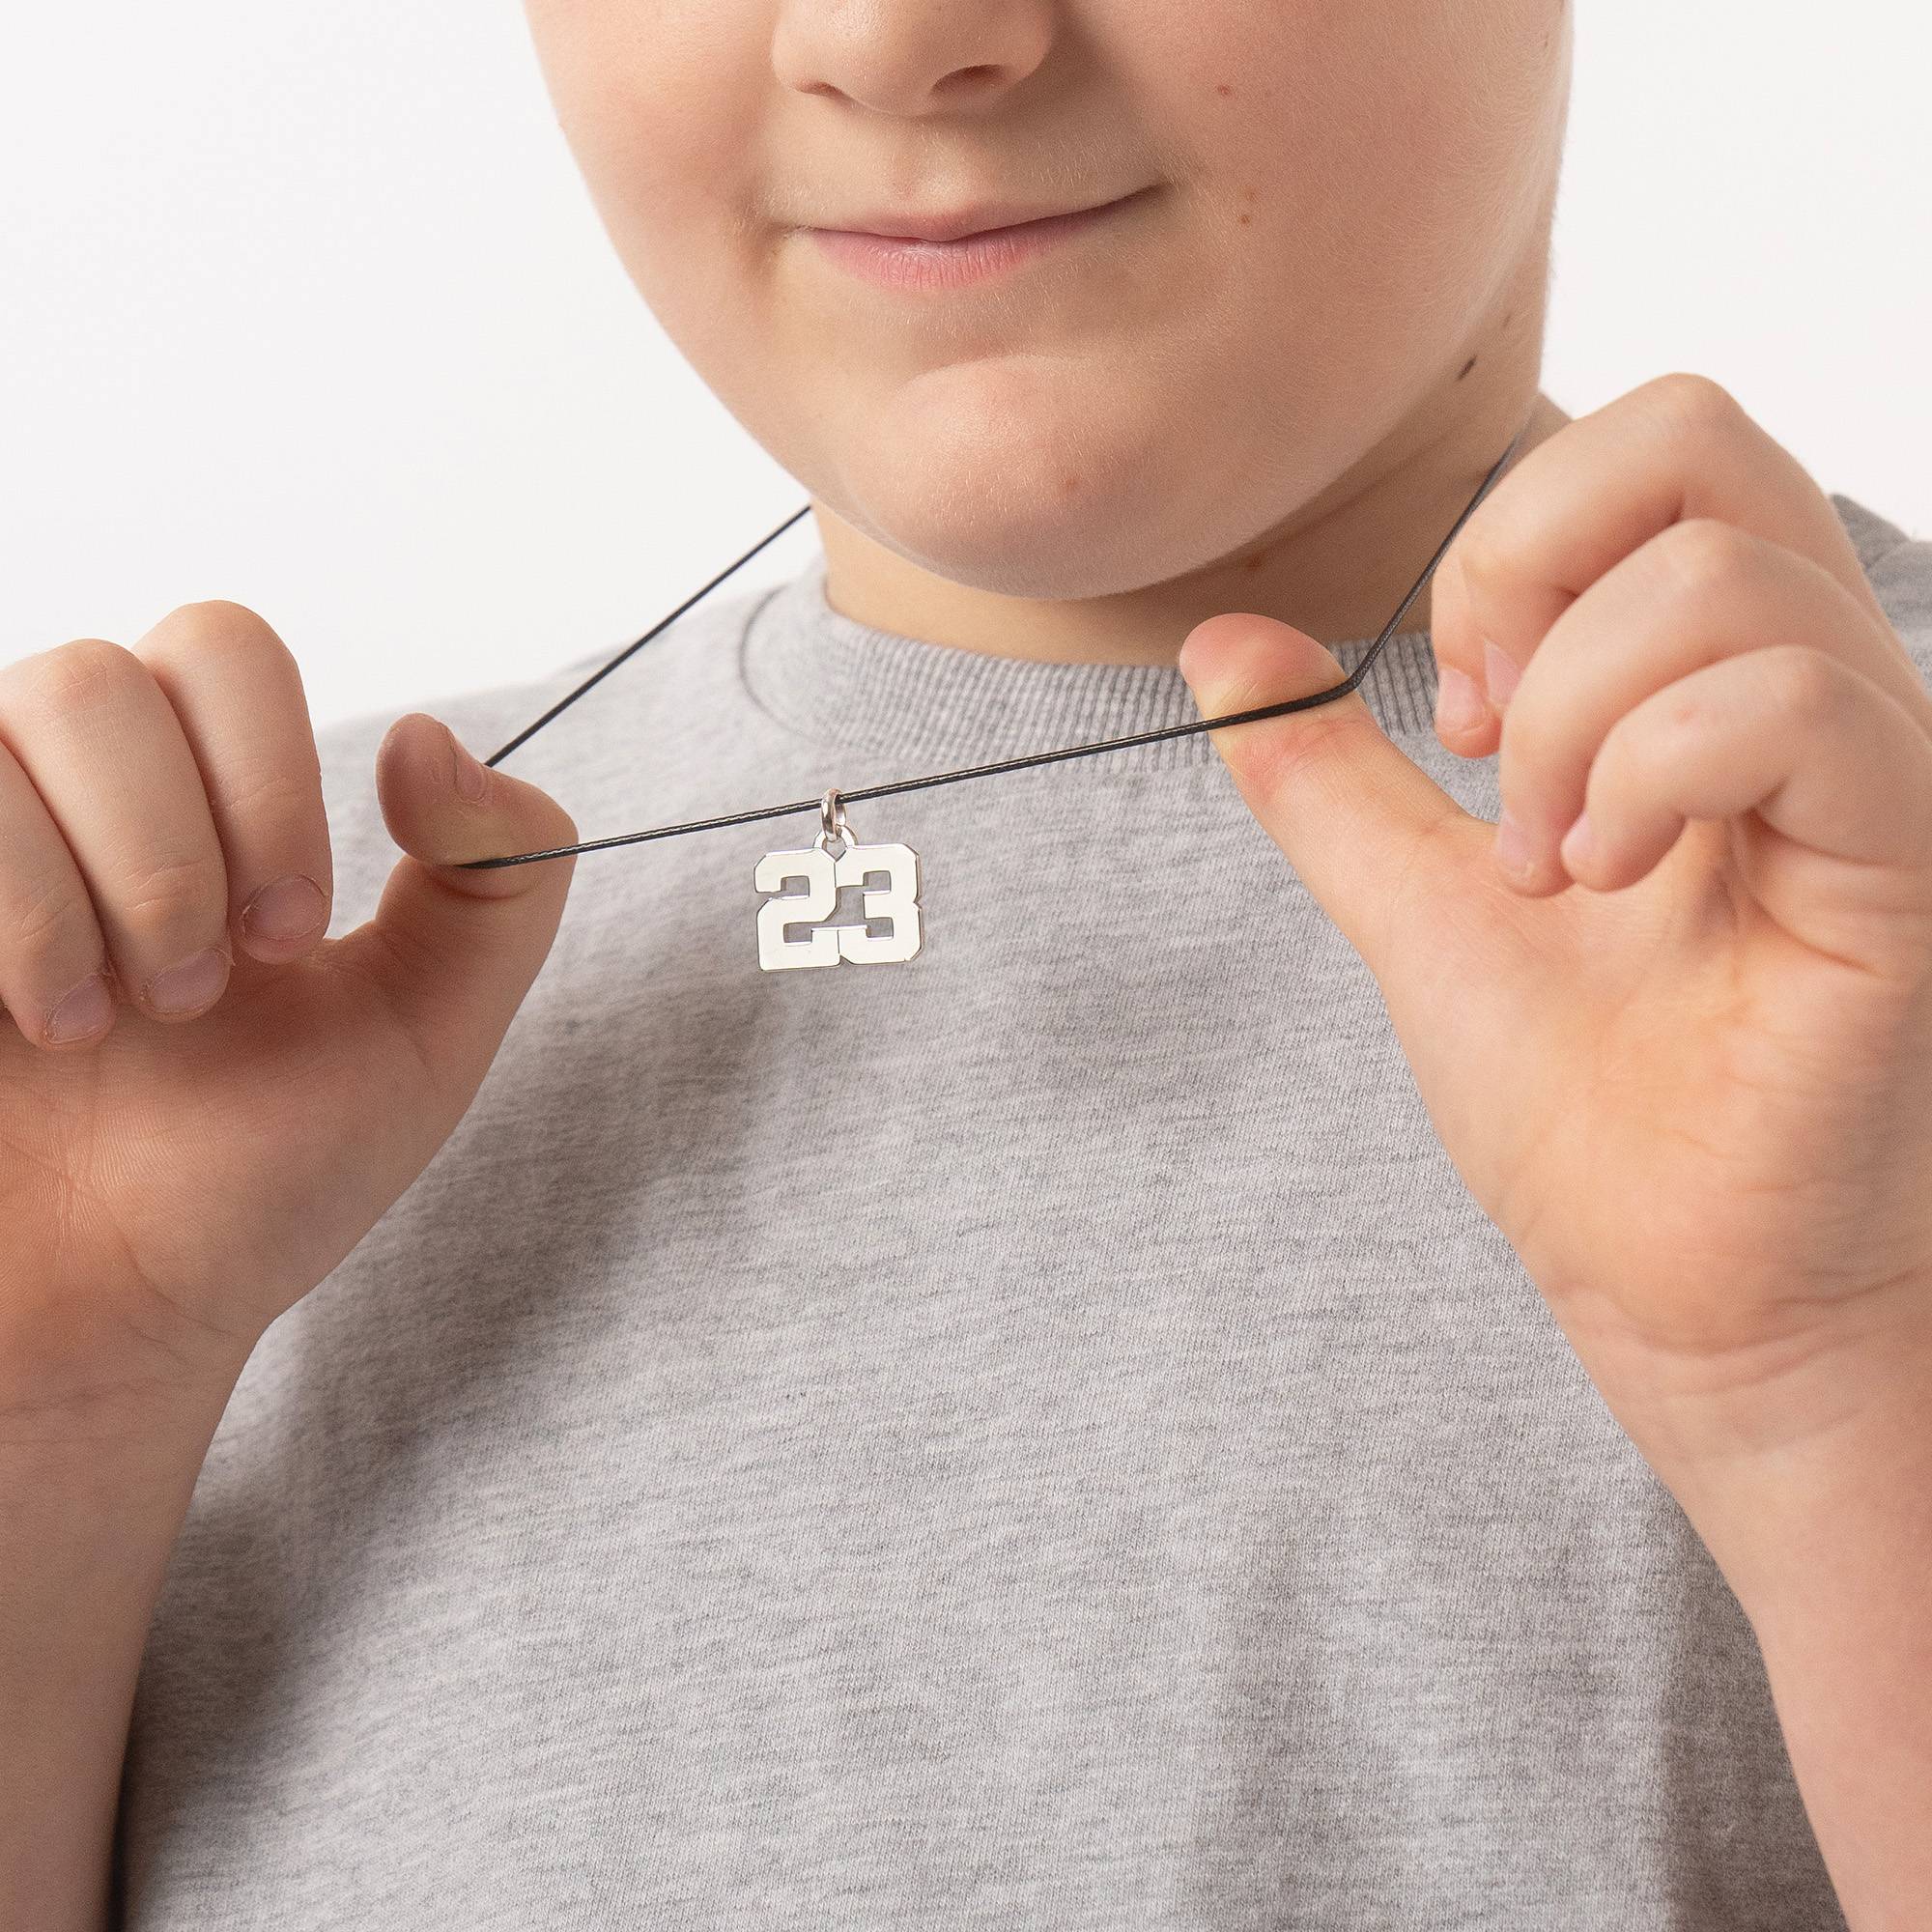 Boys Team / Player Number Necklace in Sterling Silver-1 product photo